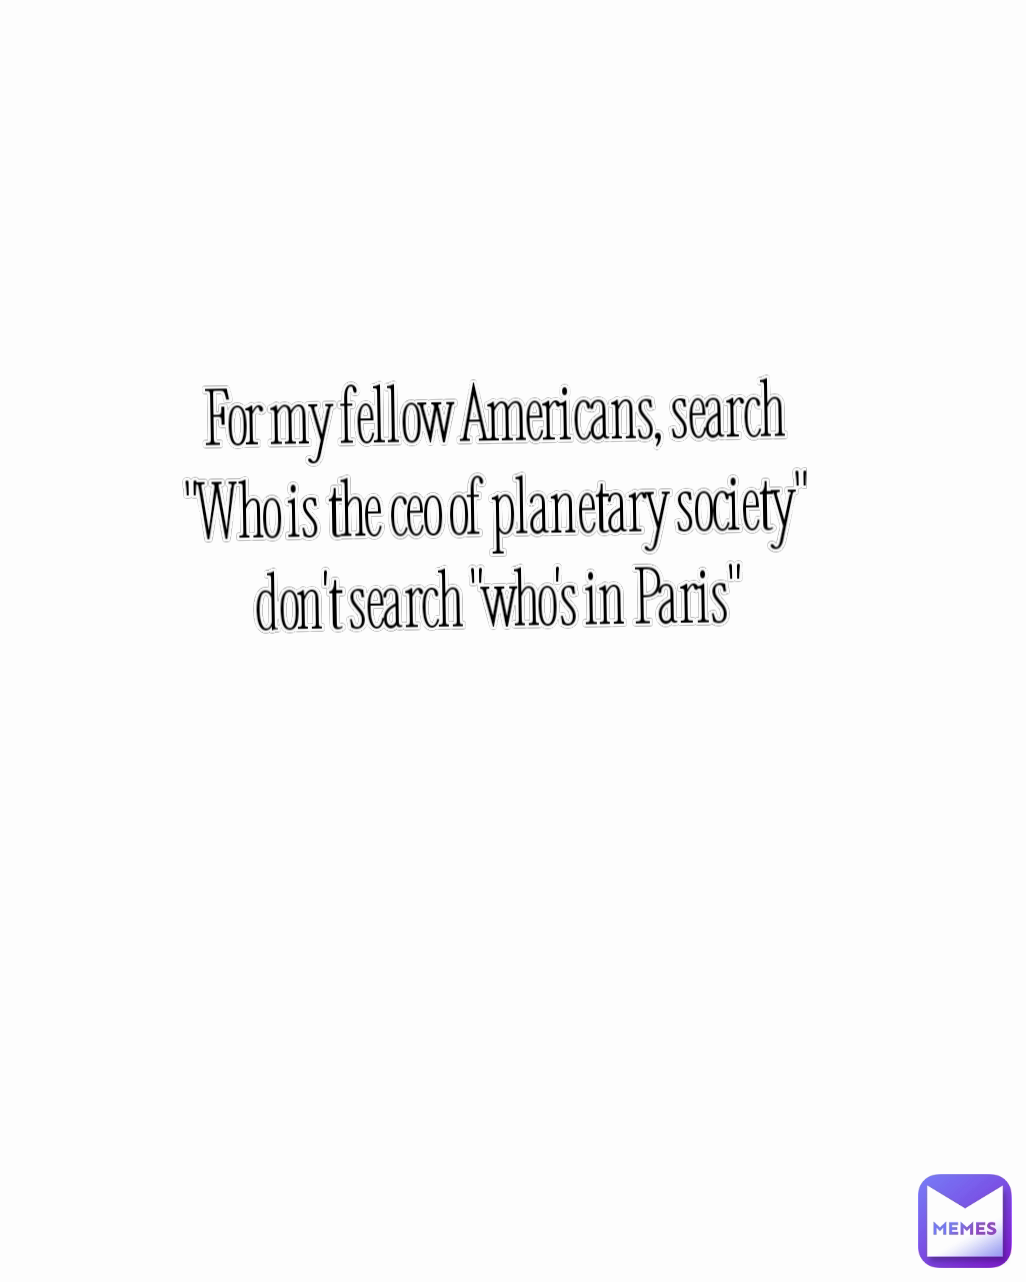 . For my fellow Americans, search "Who is the ceo of planetary society" don't search "who's in Paris"